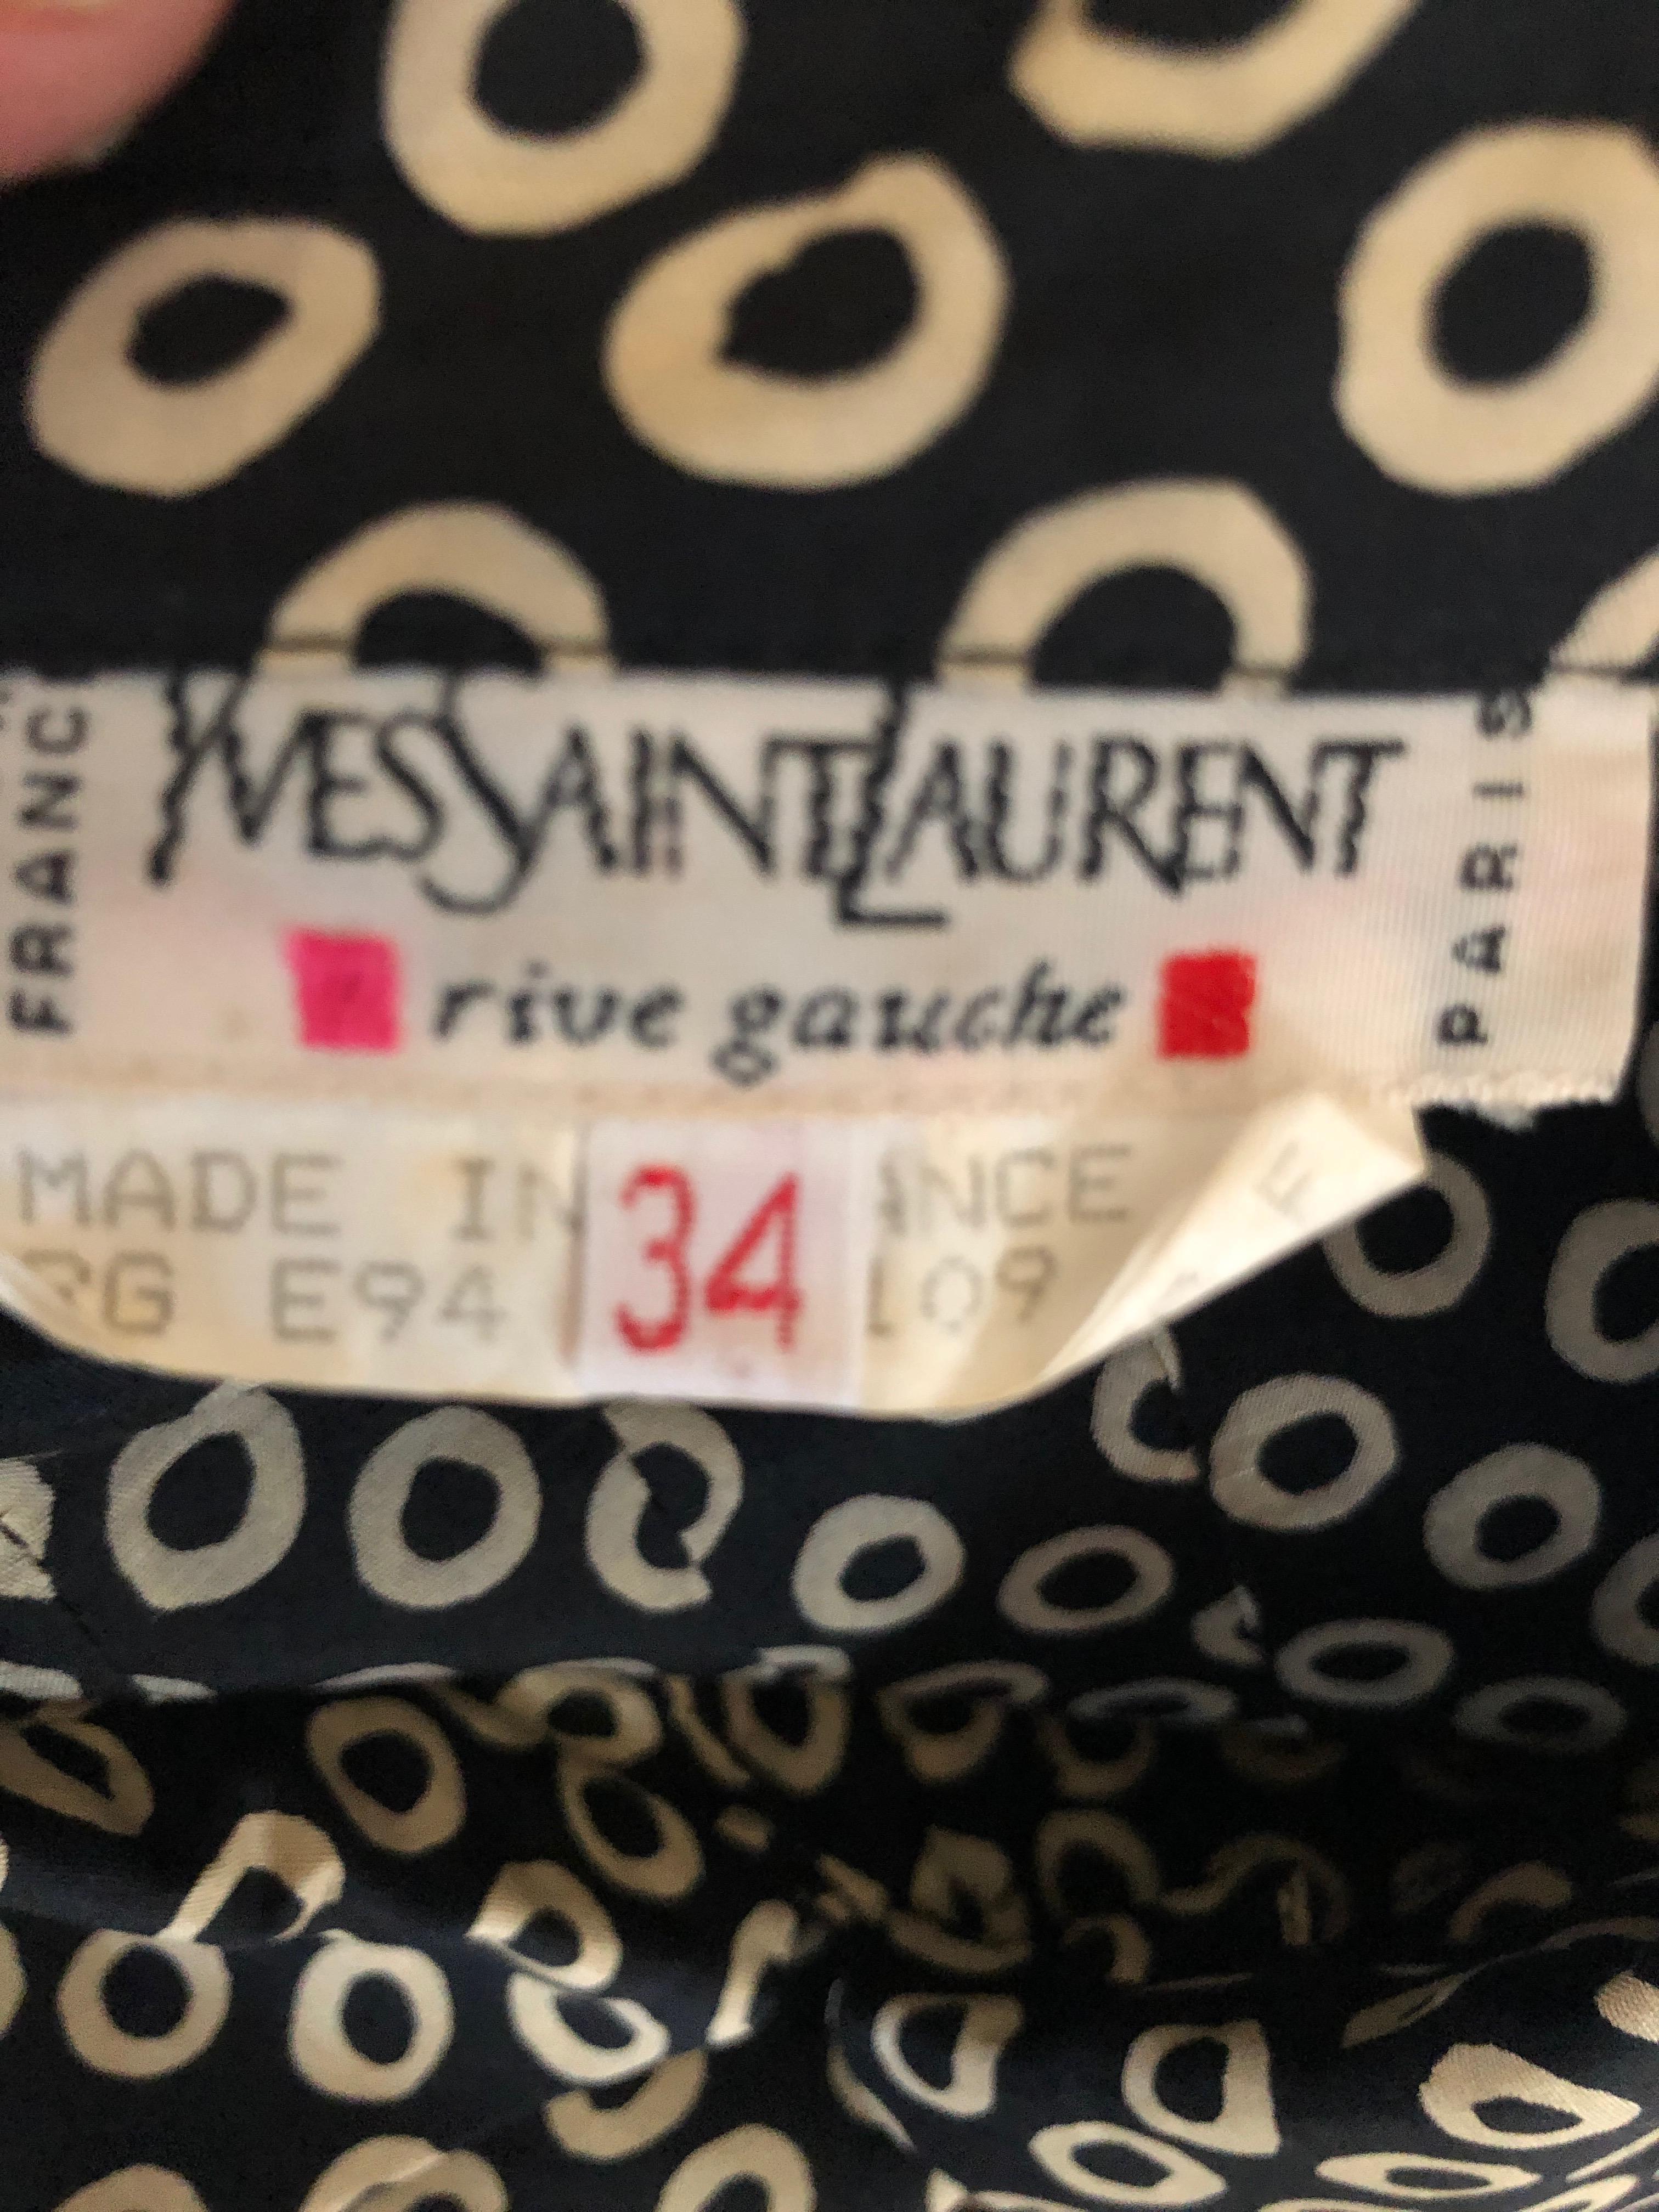 Yves Saint Laurent Rive Gauche Vintage 70's Silk Polka Dot Day Dress.
This is so charming with tie of puffed short sleeves.
Sz 34 , but seems to run large
Bust 38